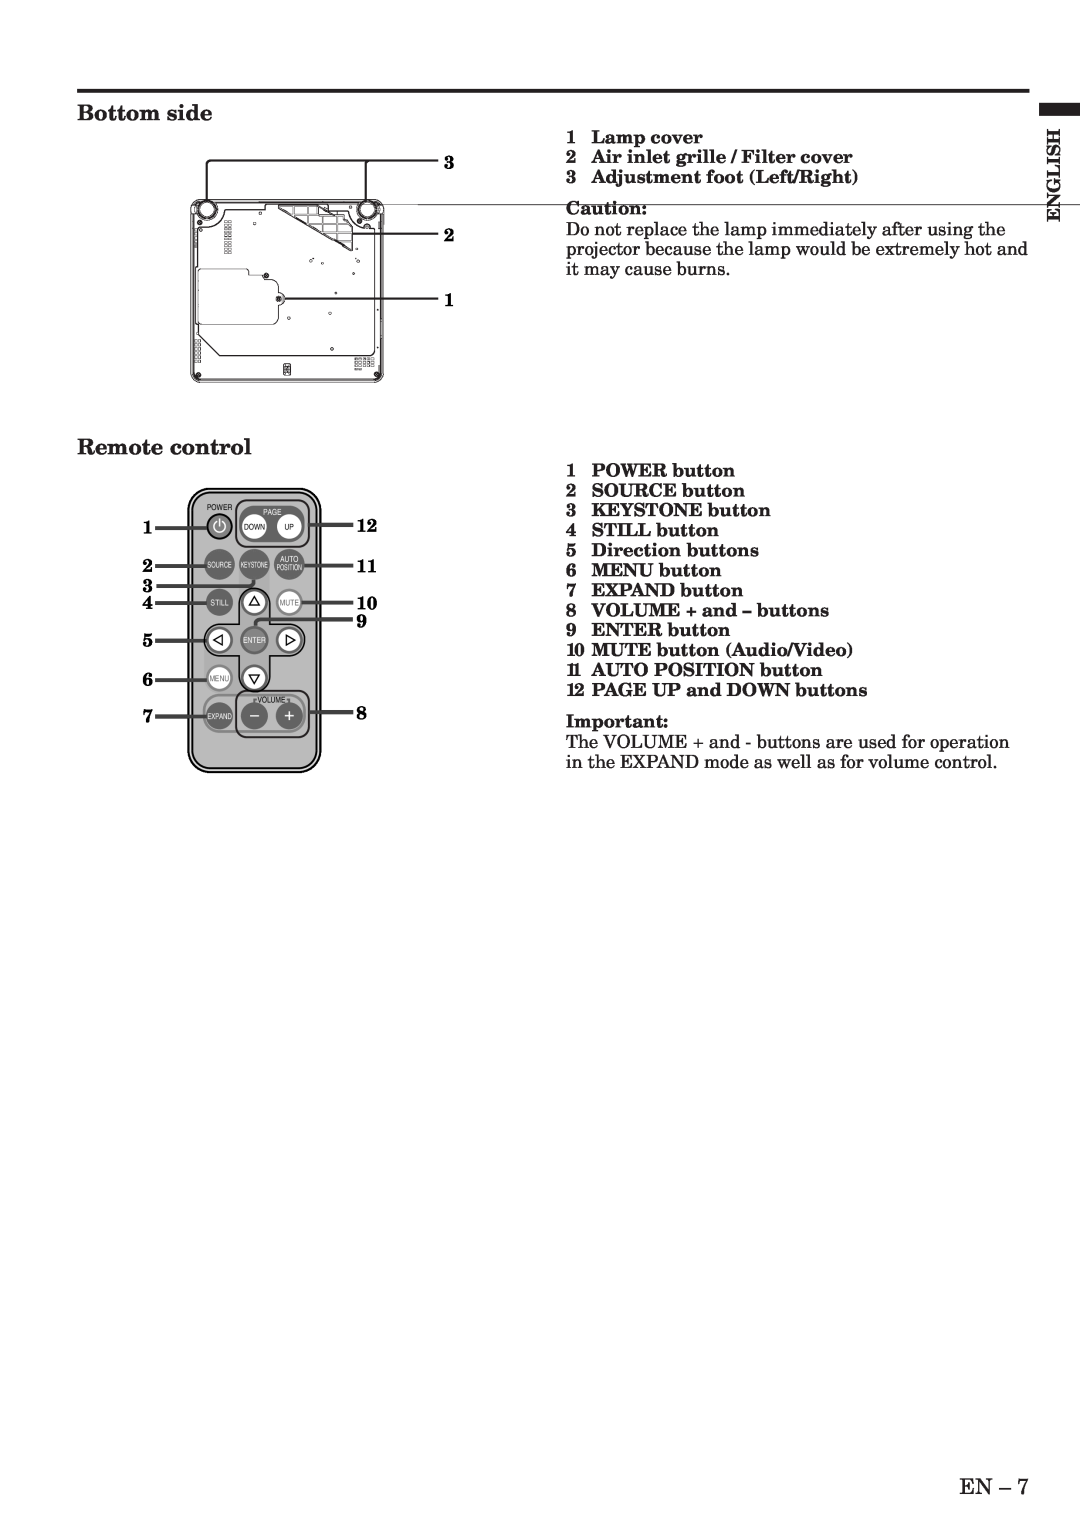 Mitsubishi Electronics XL5U user manual Bottom side, Remote control, Lamp cover 2 Air inlet grille / Filter cover, English 